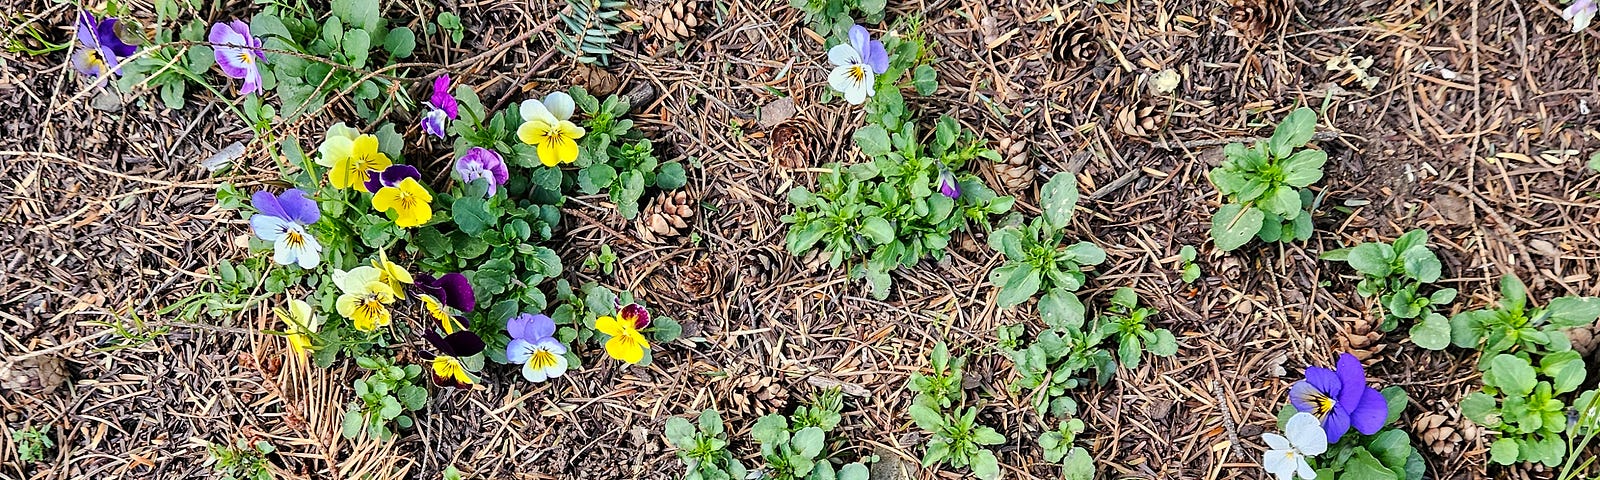 Beautiful spring flowers sprouting up from the earth